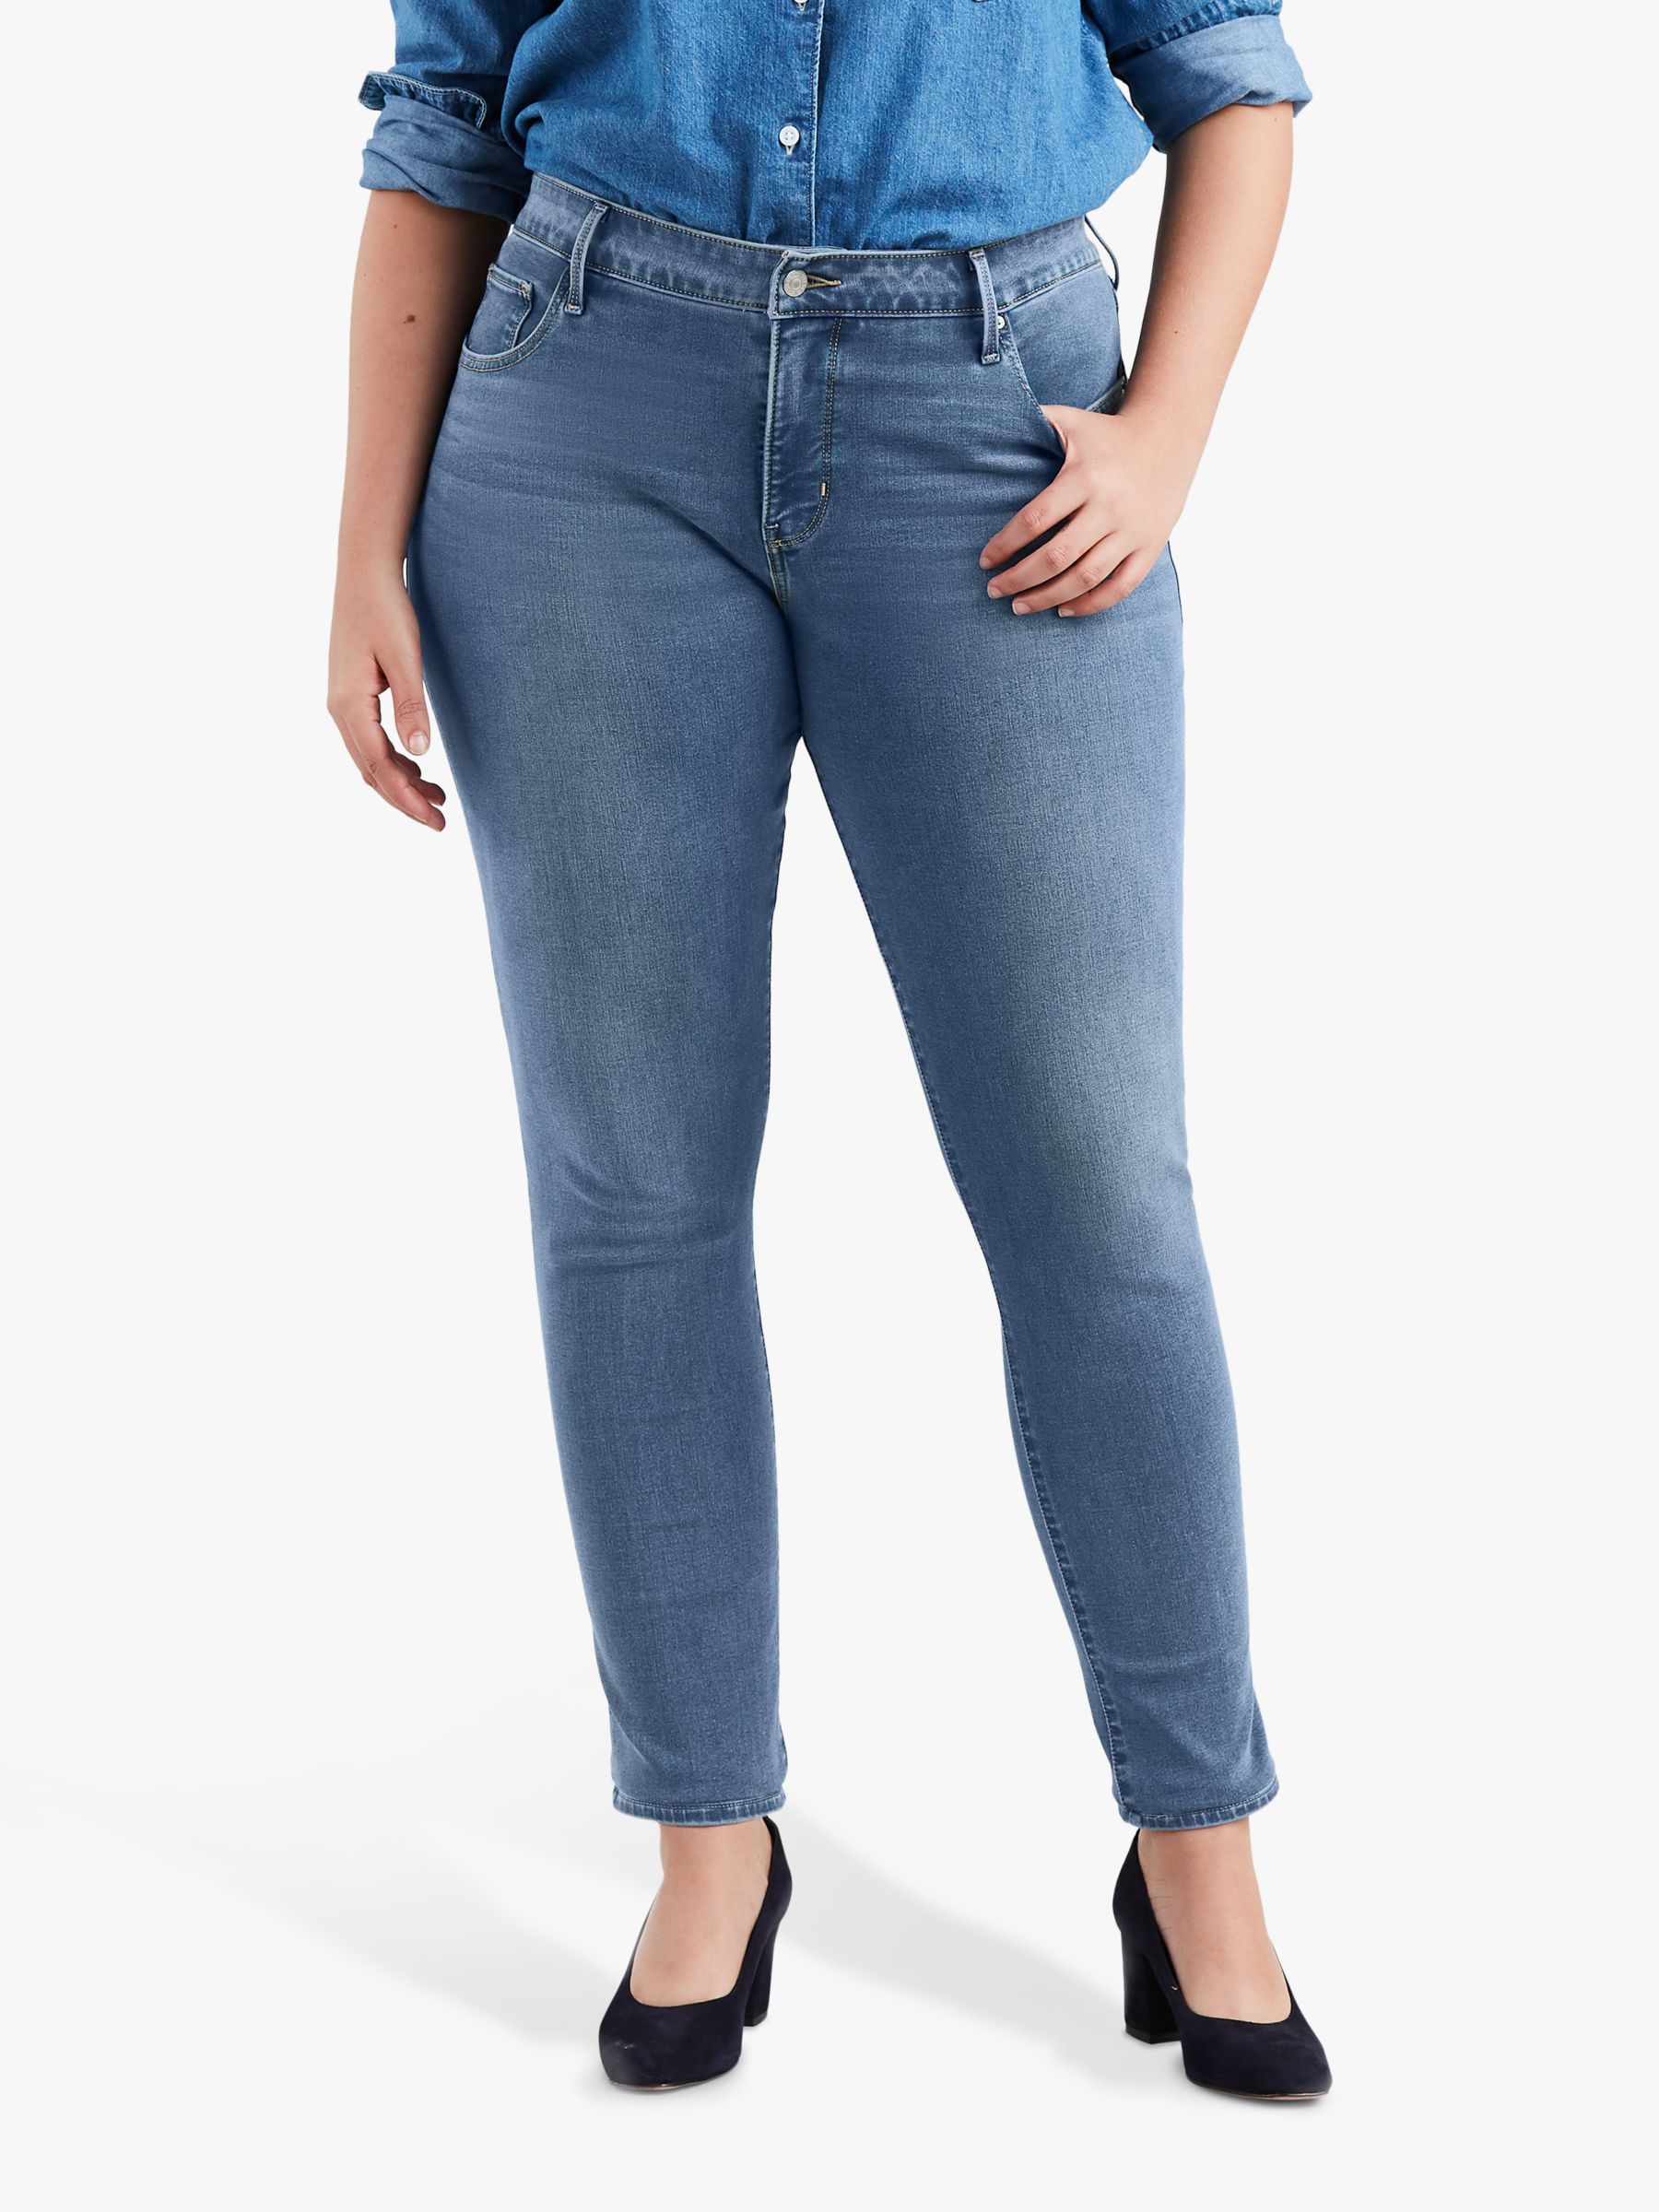 levi's 311 shaping skinny jeans plus size